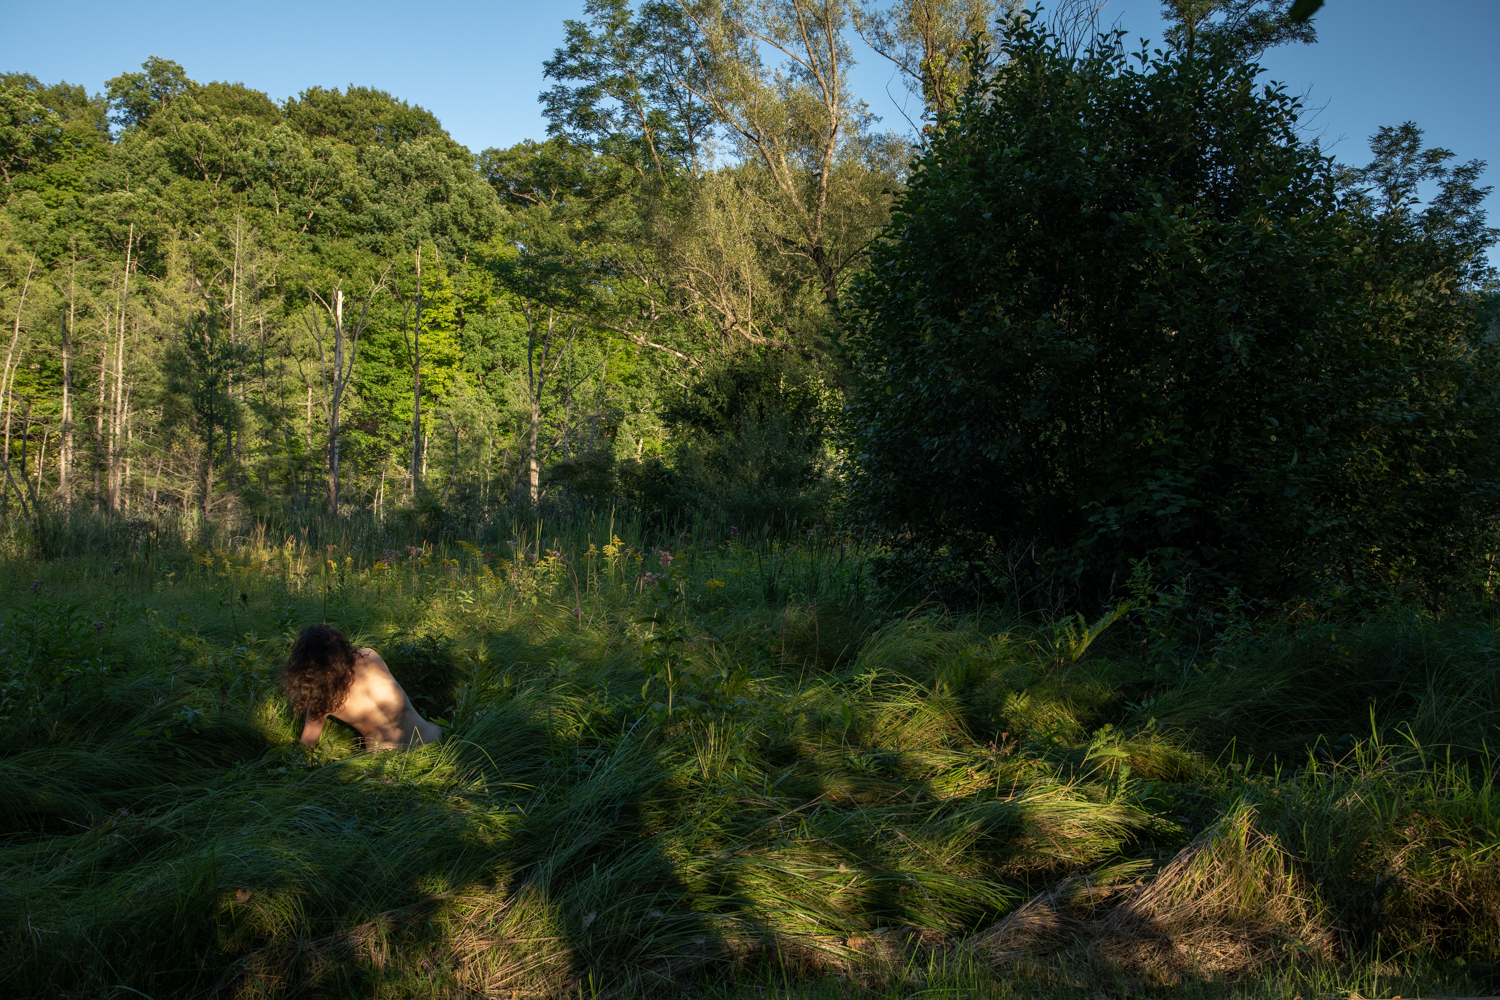 A naked person sits in tall grass amidst a forest.